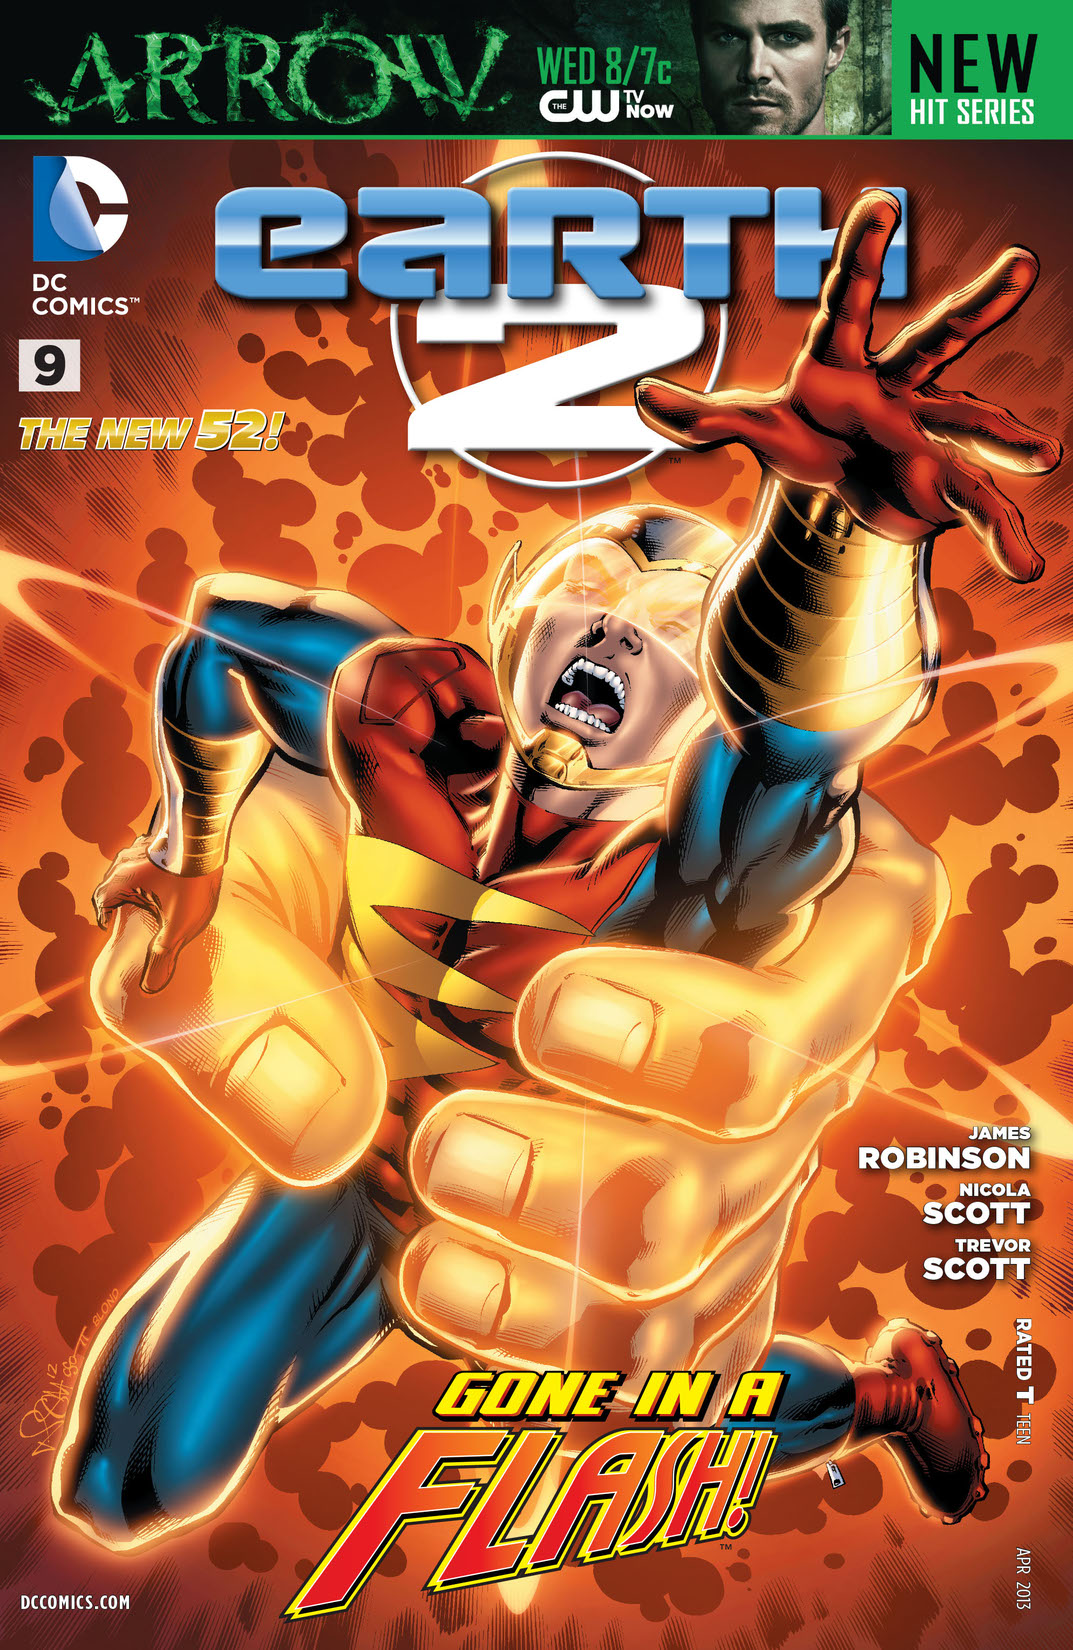 Earth 2 #9 preview images